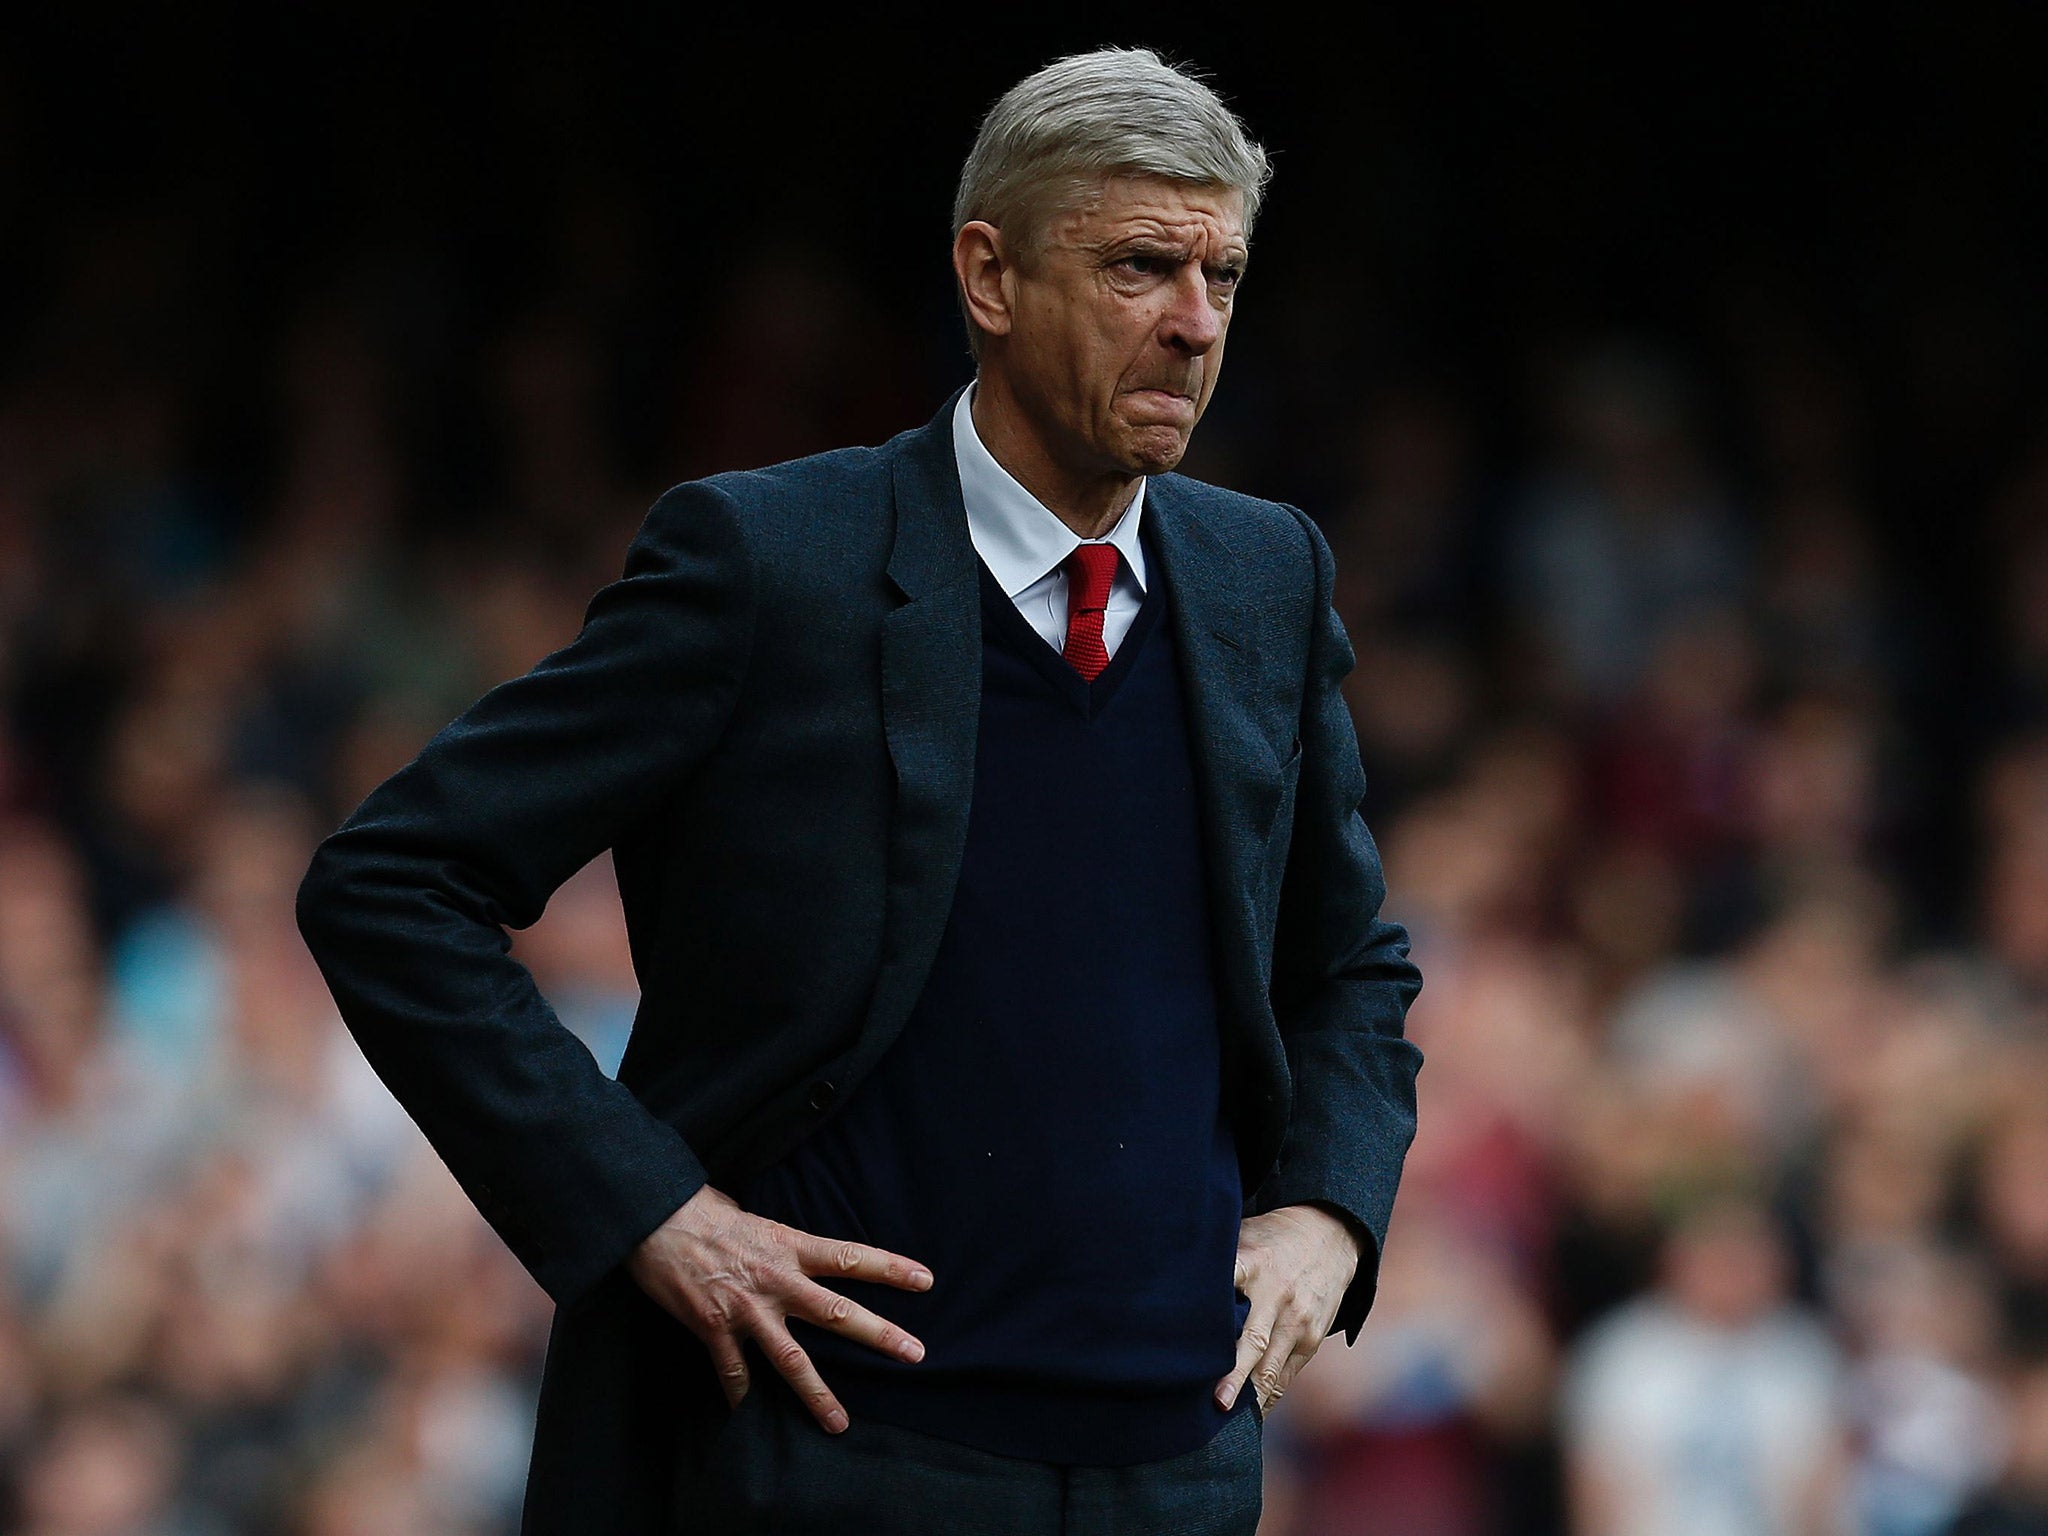 Arsenal manager Arsene Wenger needs to understand his side's have not been good enough to win the Premier League